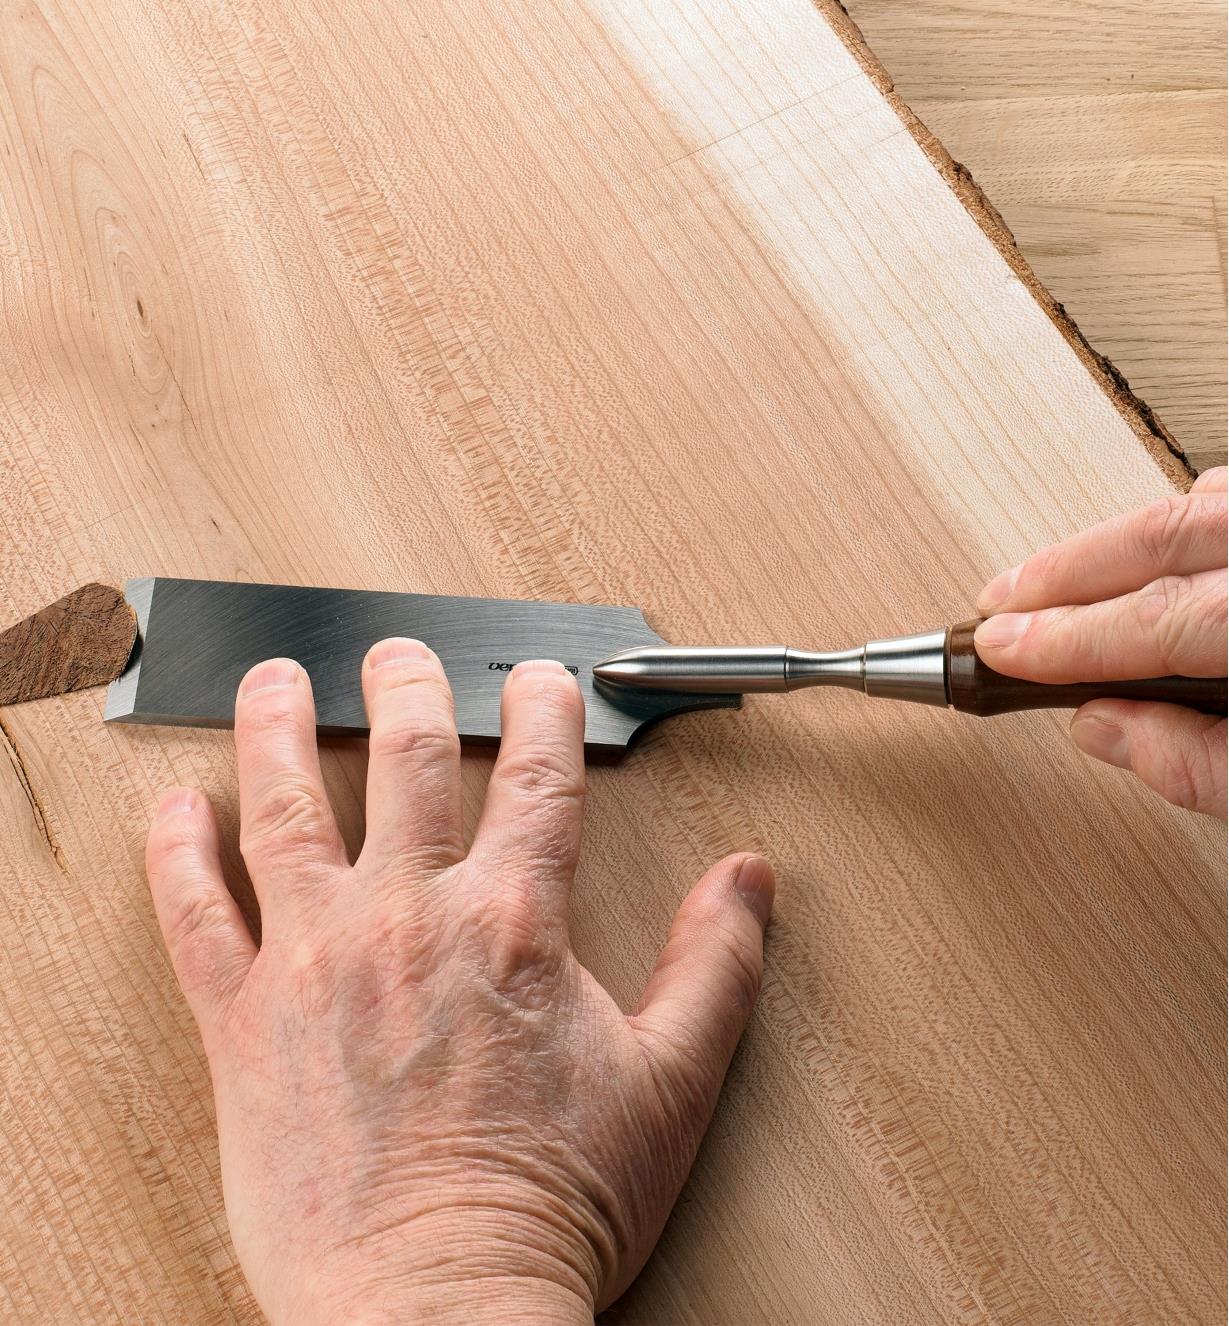 A man uses a Veritas flushing chisel to flush trim a large plank of wood